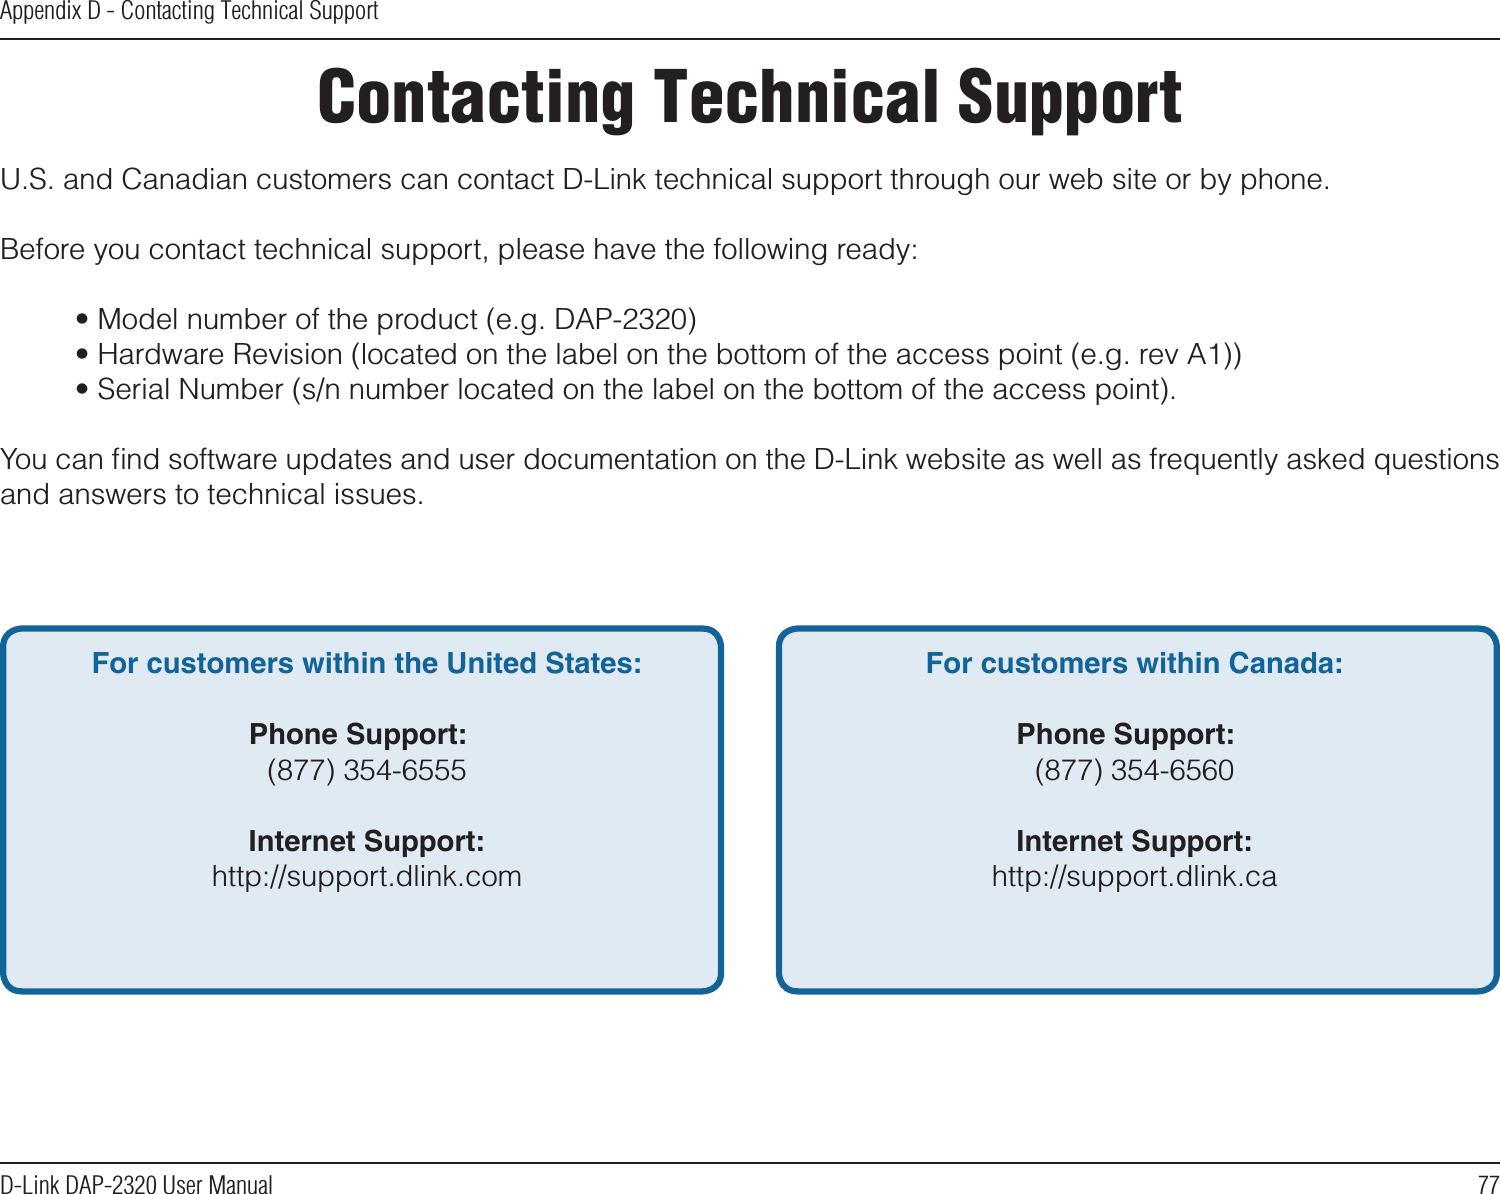 77D-Link DAP-2320 User ManualAppendix D - Contacting Technical SupportContacting Technical SupportU.S. and Canadian customers can contact D-Link technical support through our web site or by phone.Before you contact technical support, please have the following ready:  • Model number of the product (e.g. DAP-2320)  • Hardware Revision (located on the label on the bottom of the access point (e.g. rev A1))  • Serial Number (s/n number located on the label on the bottom of the access point). You can ﬁnd software updates and user documentation on the D-Link website as well as frequently asked questions and answers to technical issues.For customers within the United States: Phone Support:  (877) 354-6555 Internet Support:  http://support.dlink.com For customers within Canada: Phone Support:  (877) 354-6560  Internet Support:  http://support.dlink.ca 